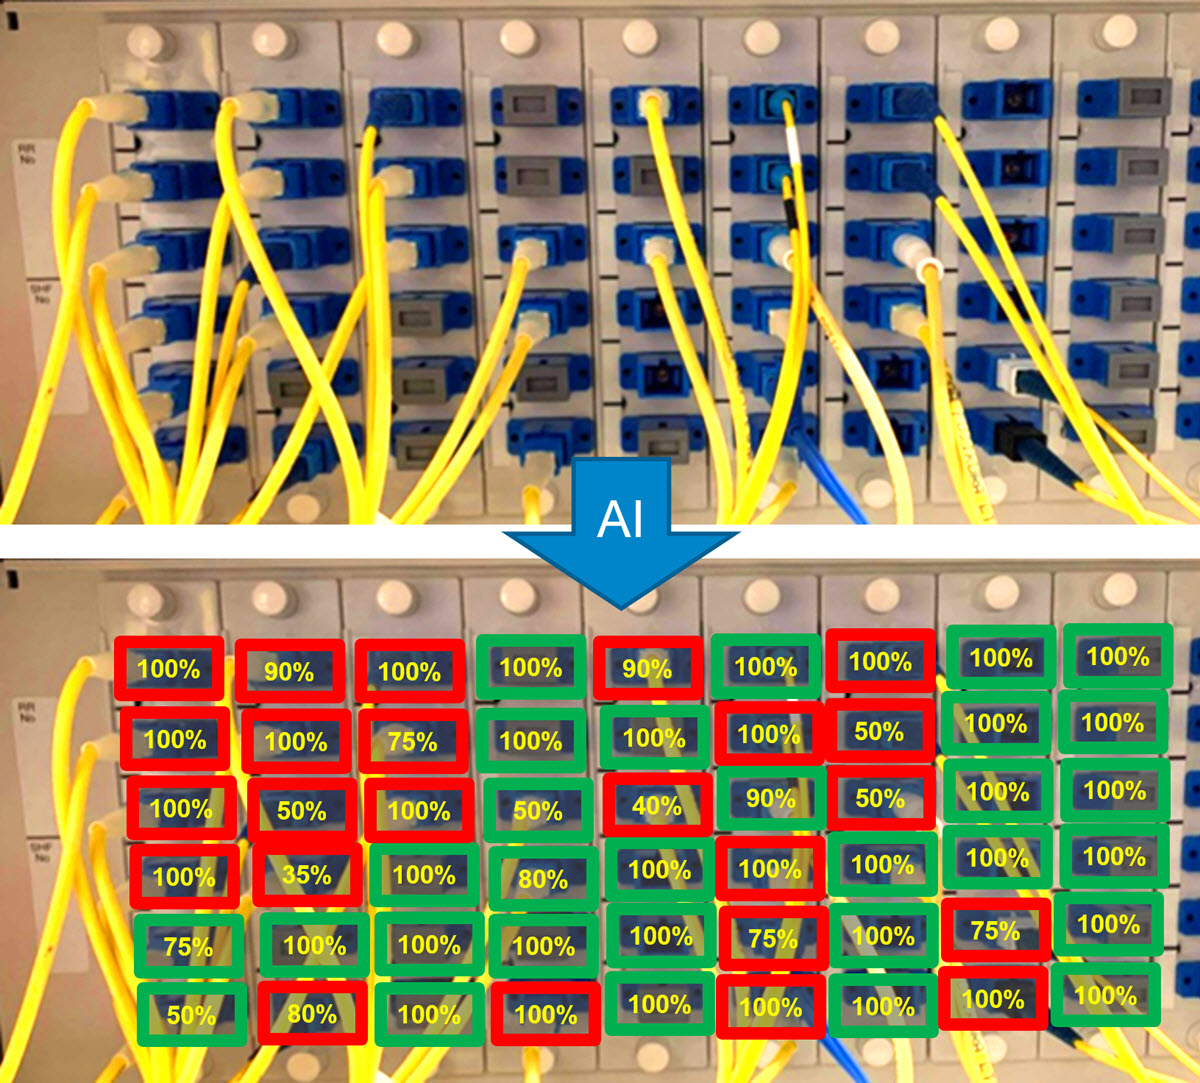 Patch Panel AR example